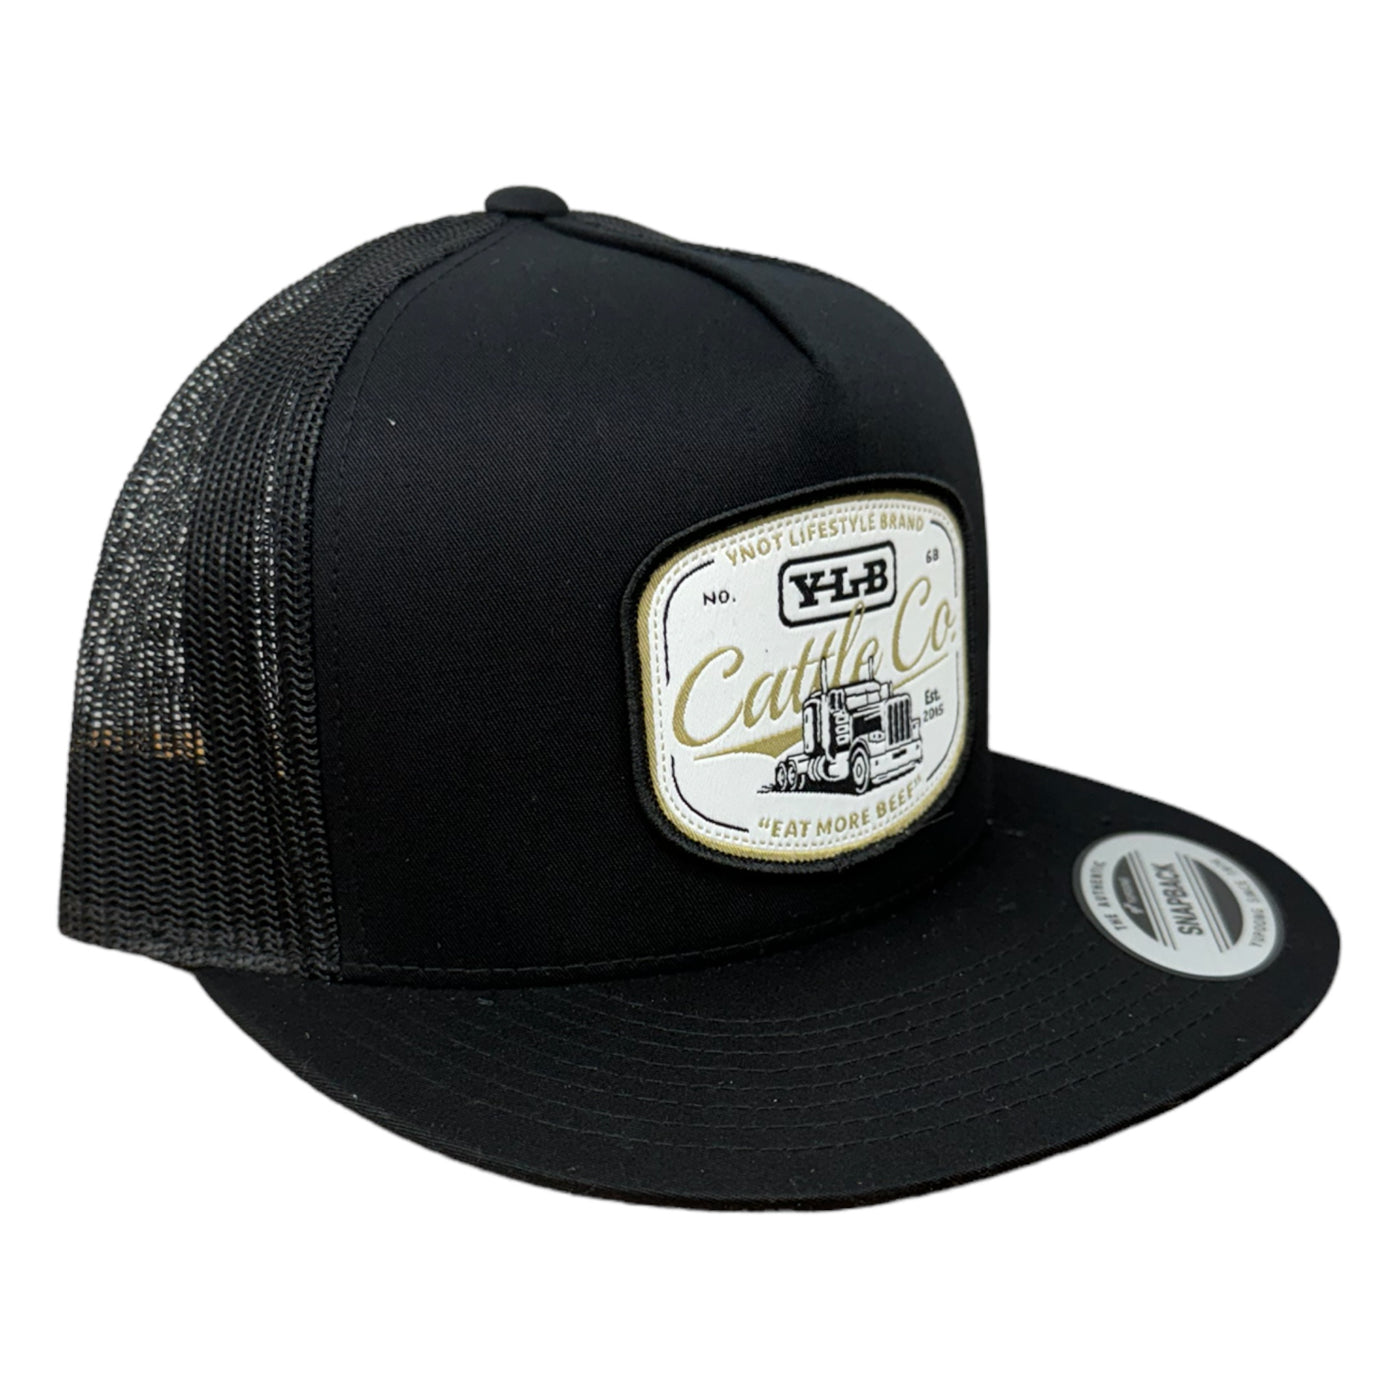 YNOT Lifestyle Brand Hat and Apparel - Quality Farmer & Rancher Hats - Black Gearjammer Patch